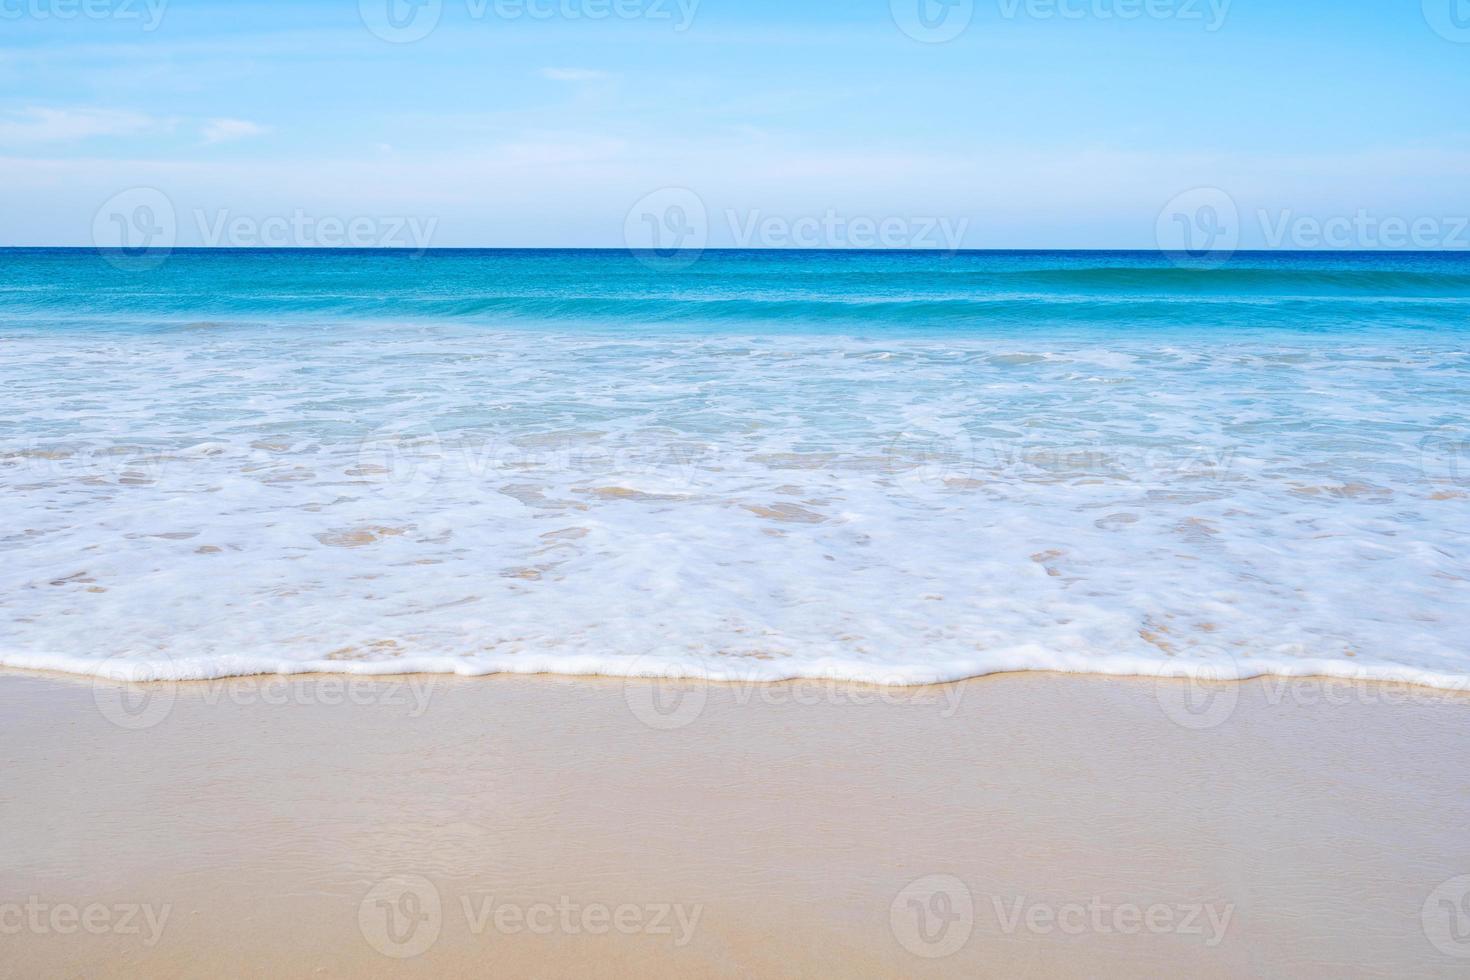 Phuket sea Beautiful tropical sandy beach with blue ocean and blue sky background image for nature background or summer background photo